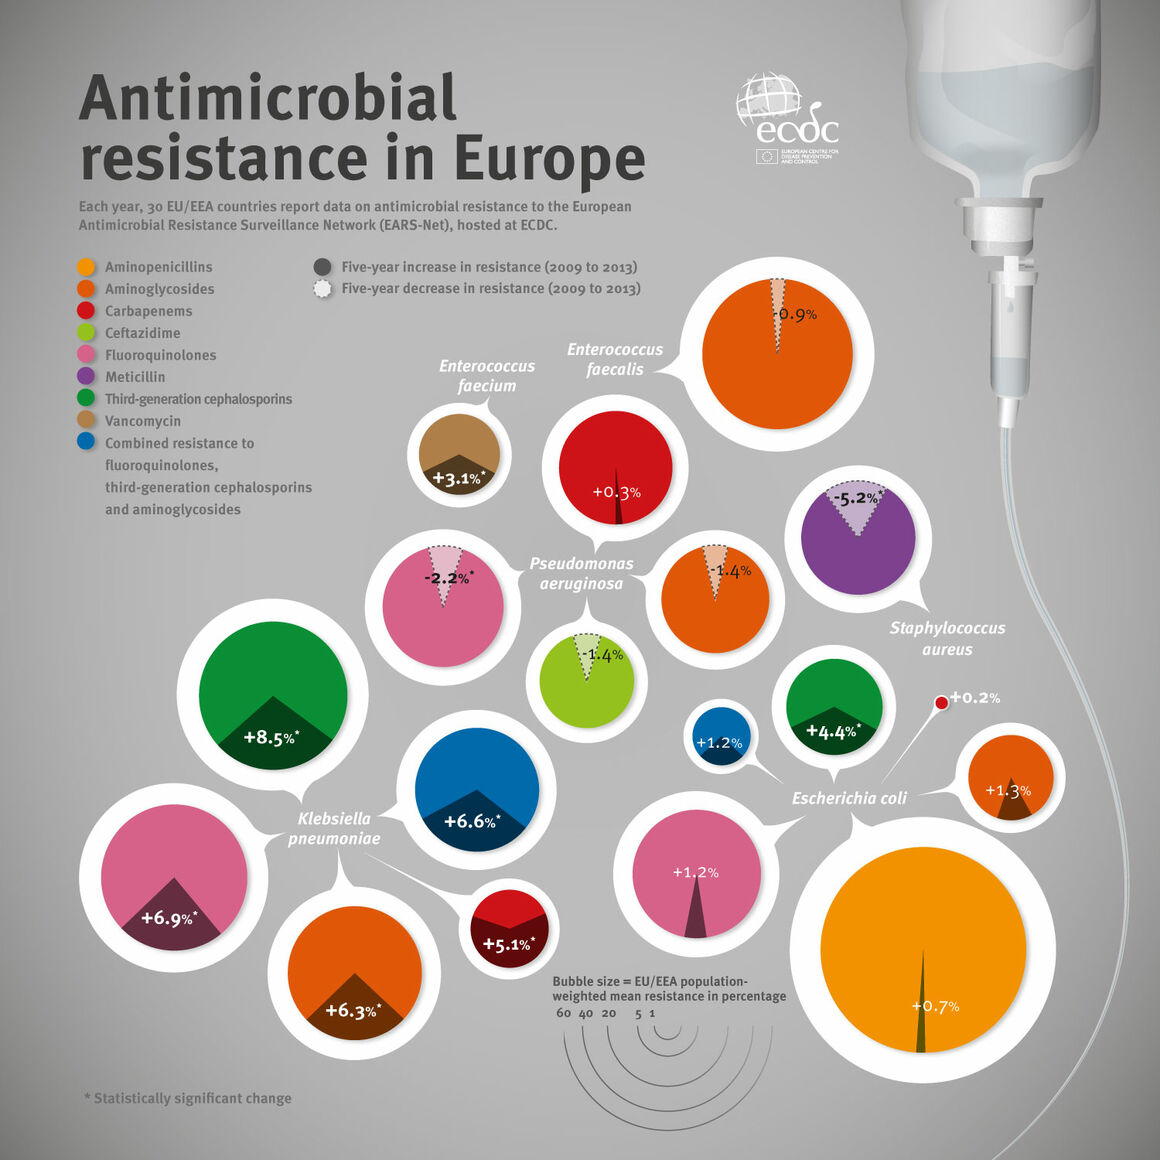 Antimicrobial resistance in Europe - infographic